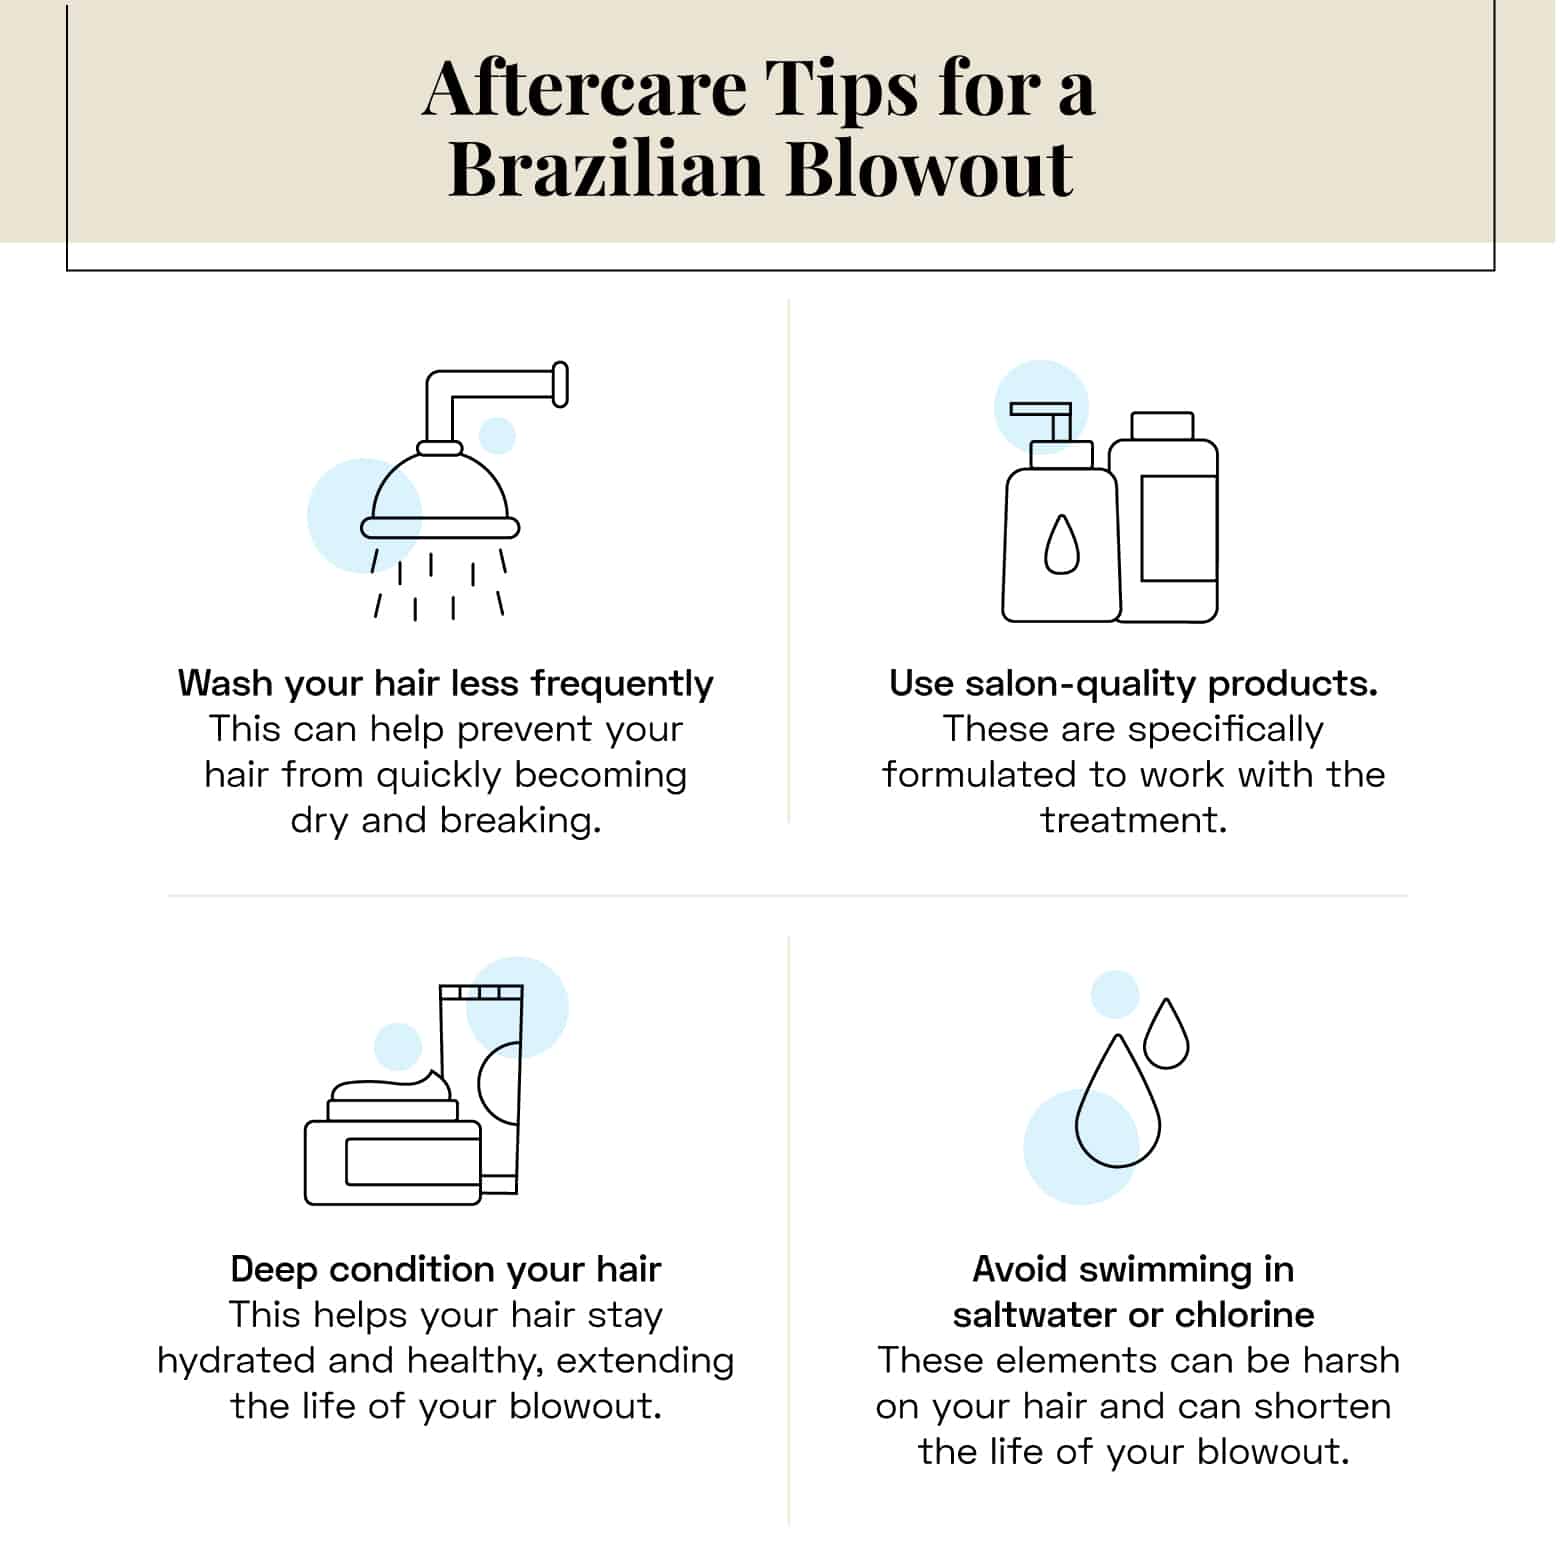 aftercare tips for a brazilian blowout